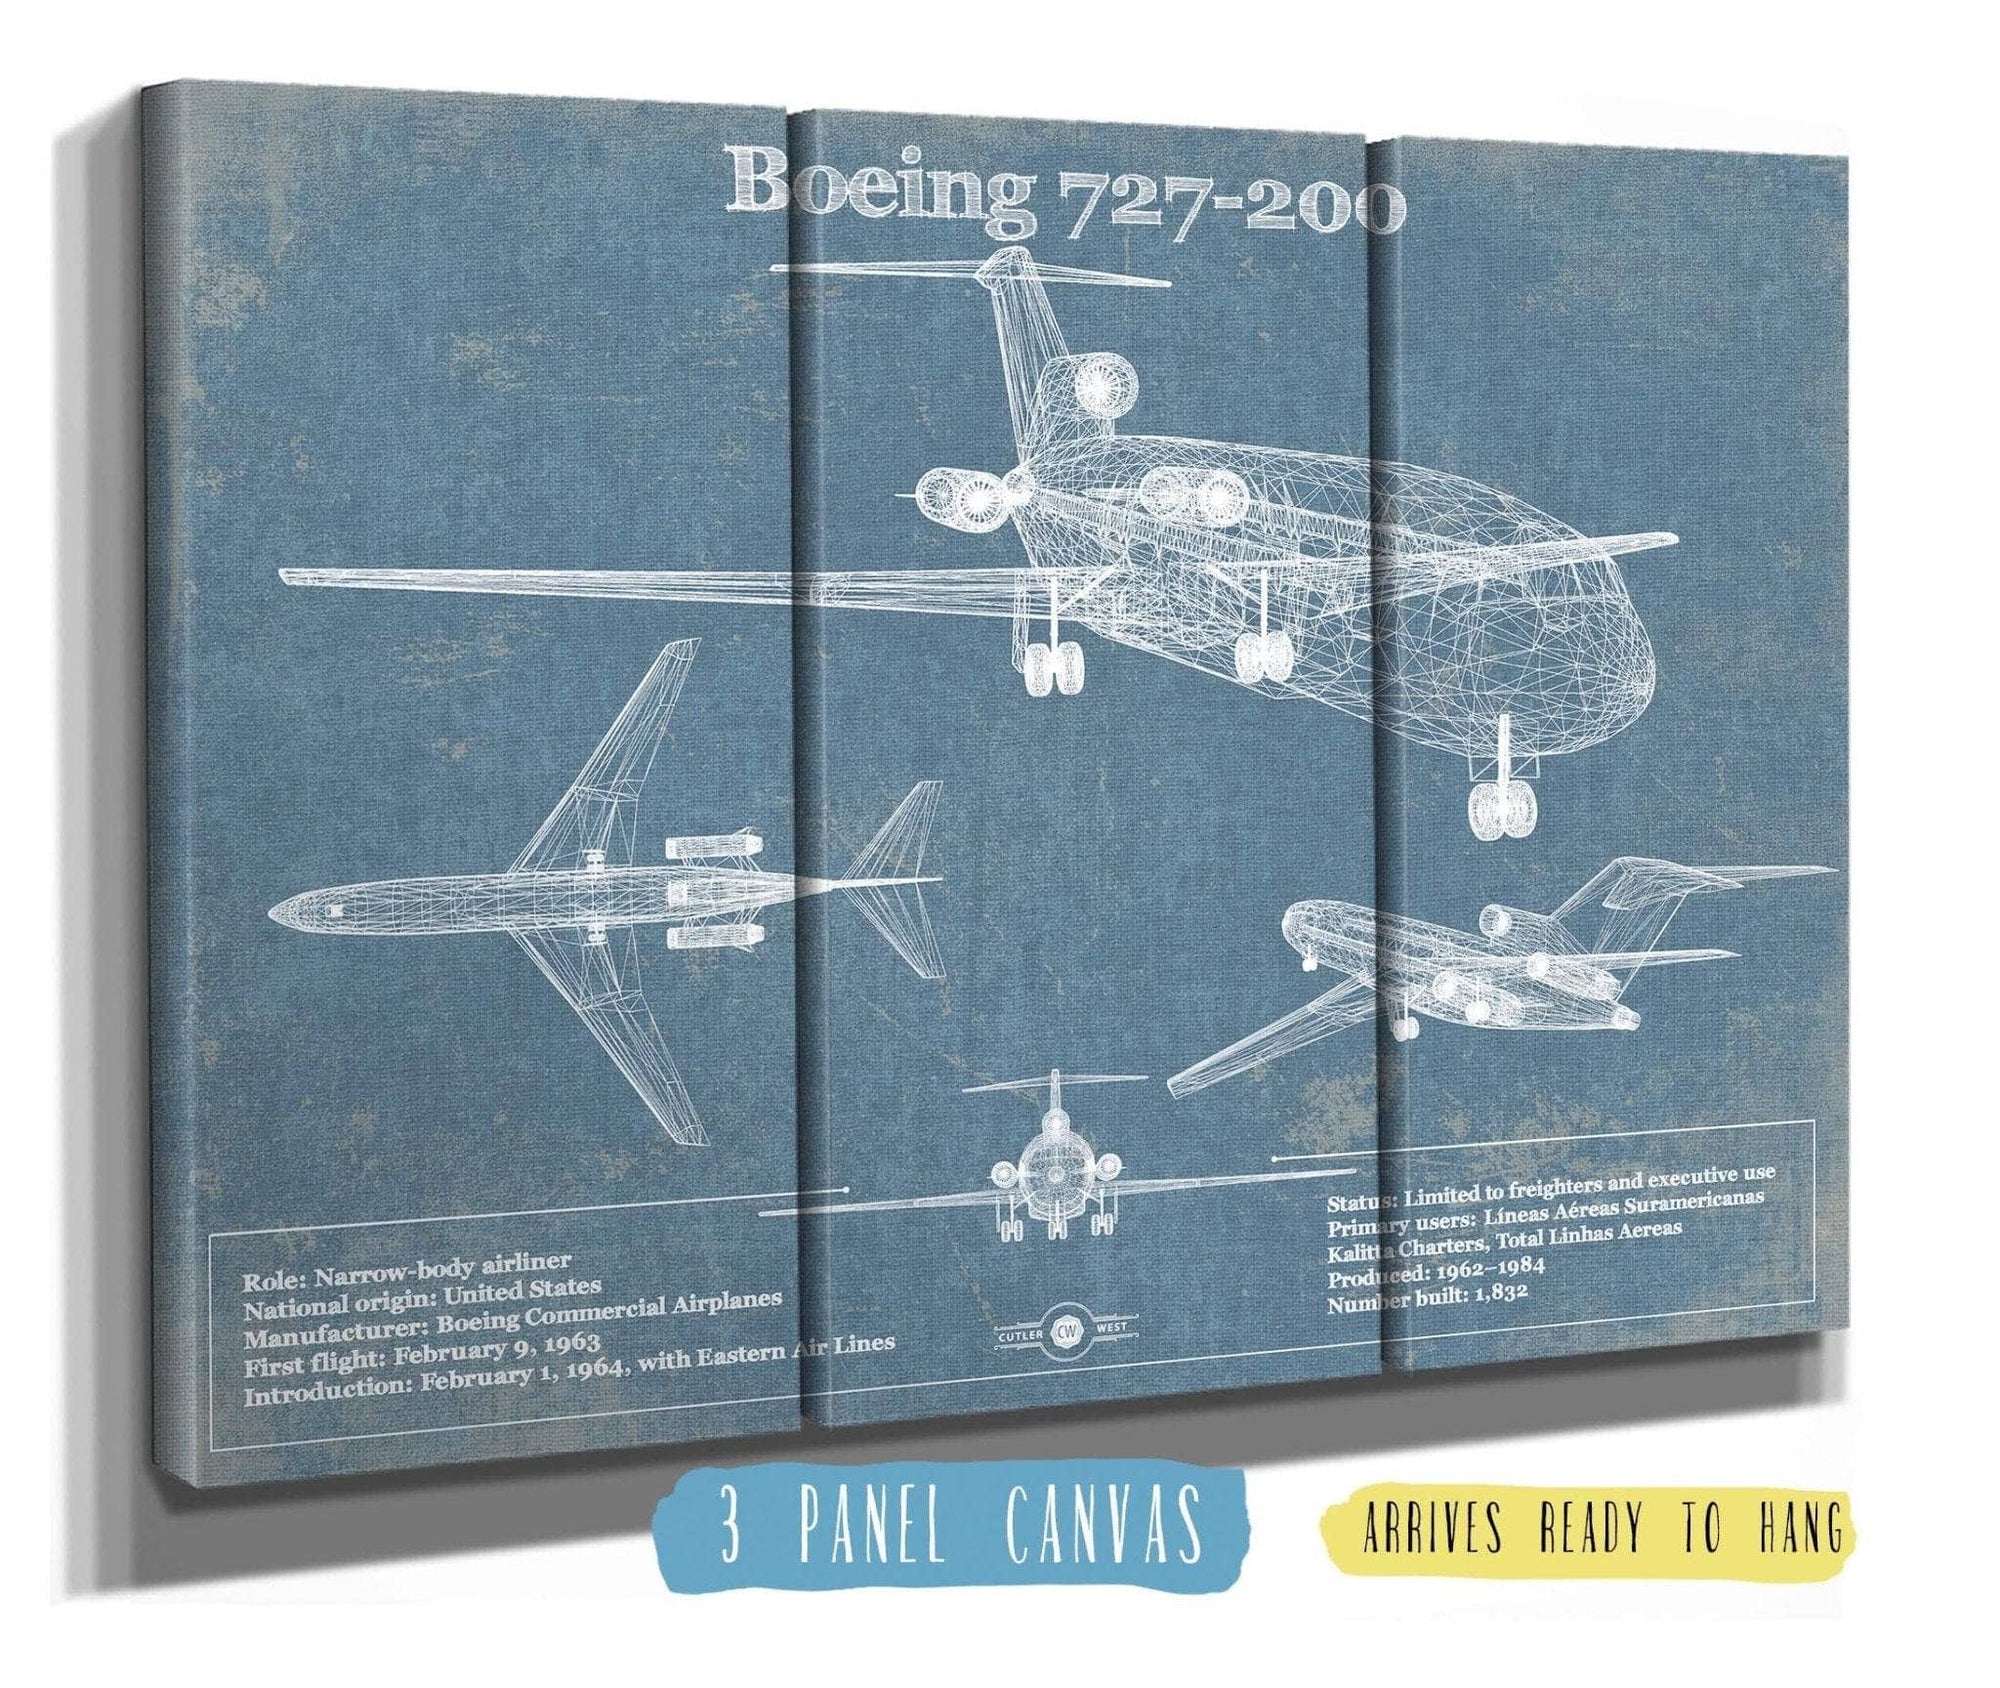 Cutler West 48" x 32" / 3 Panel Canvas Wrap Boeing 727-200 Vintage Aviation Blueprint Print - Custom Pilot Name Can Be Added 883686694-48"-x-32"48457